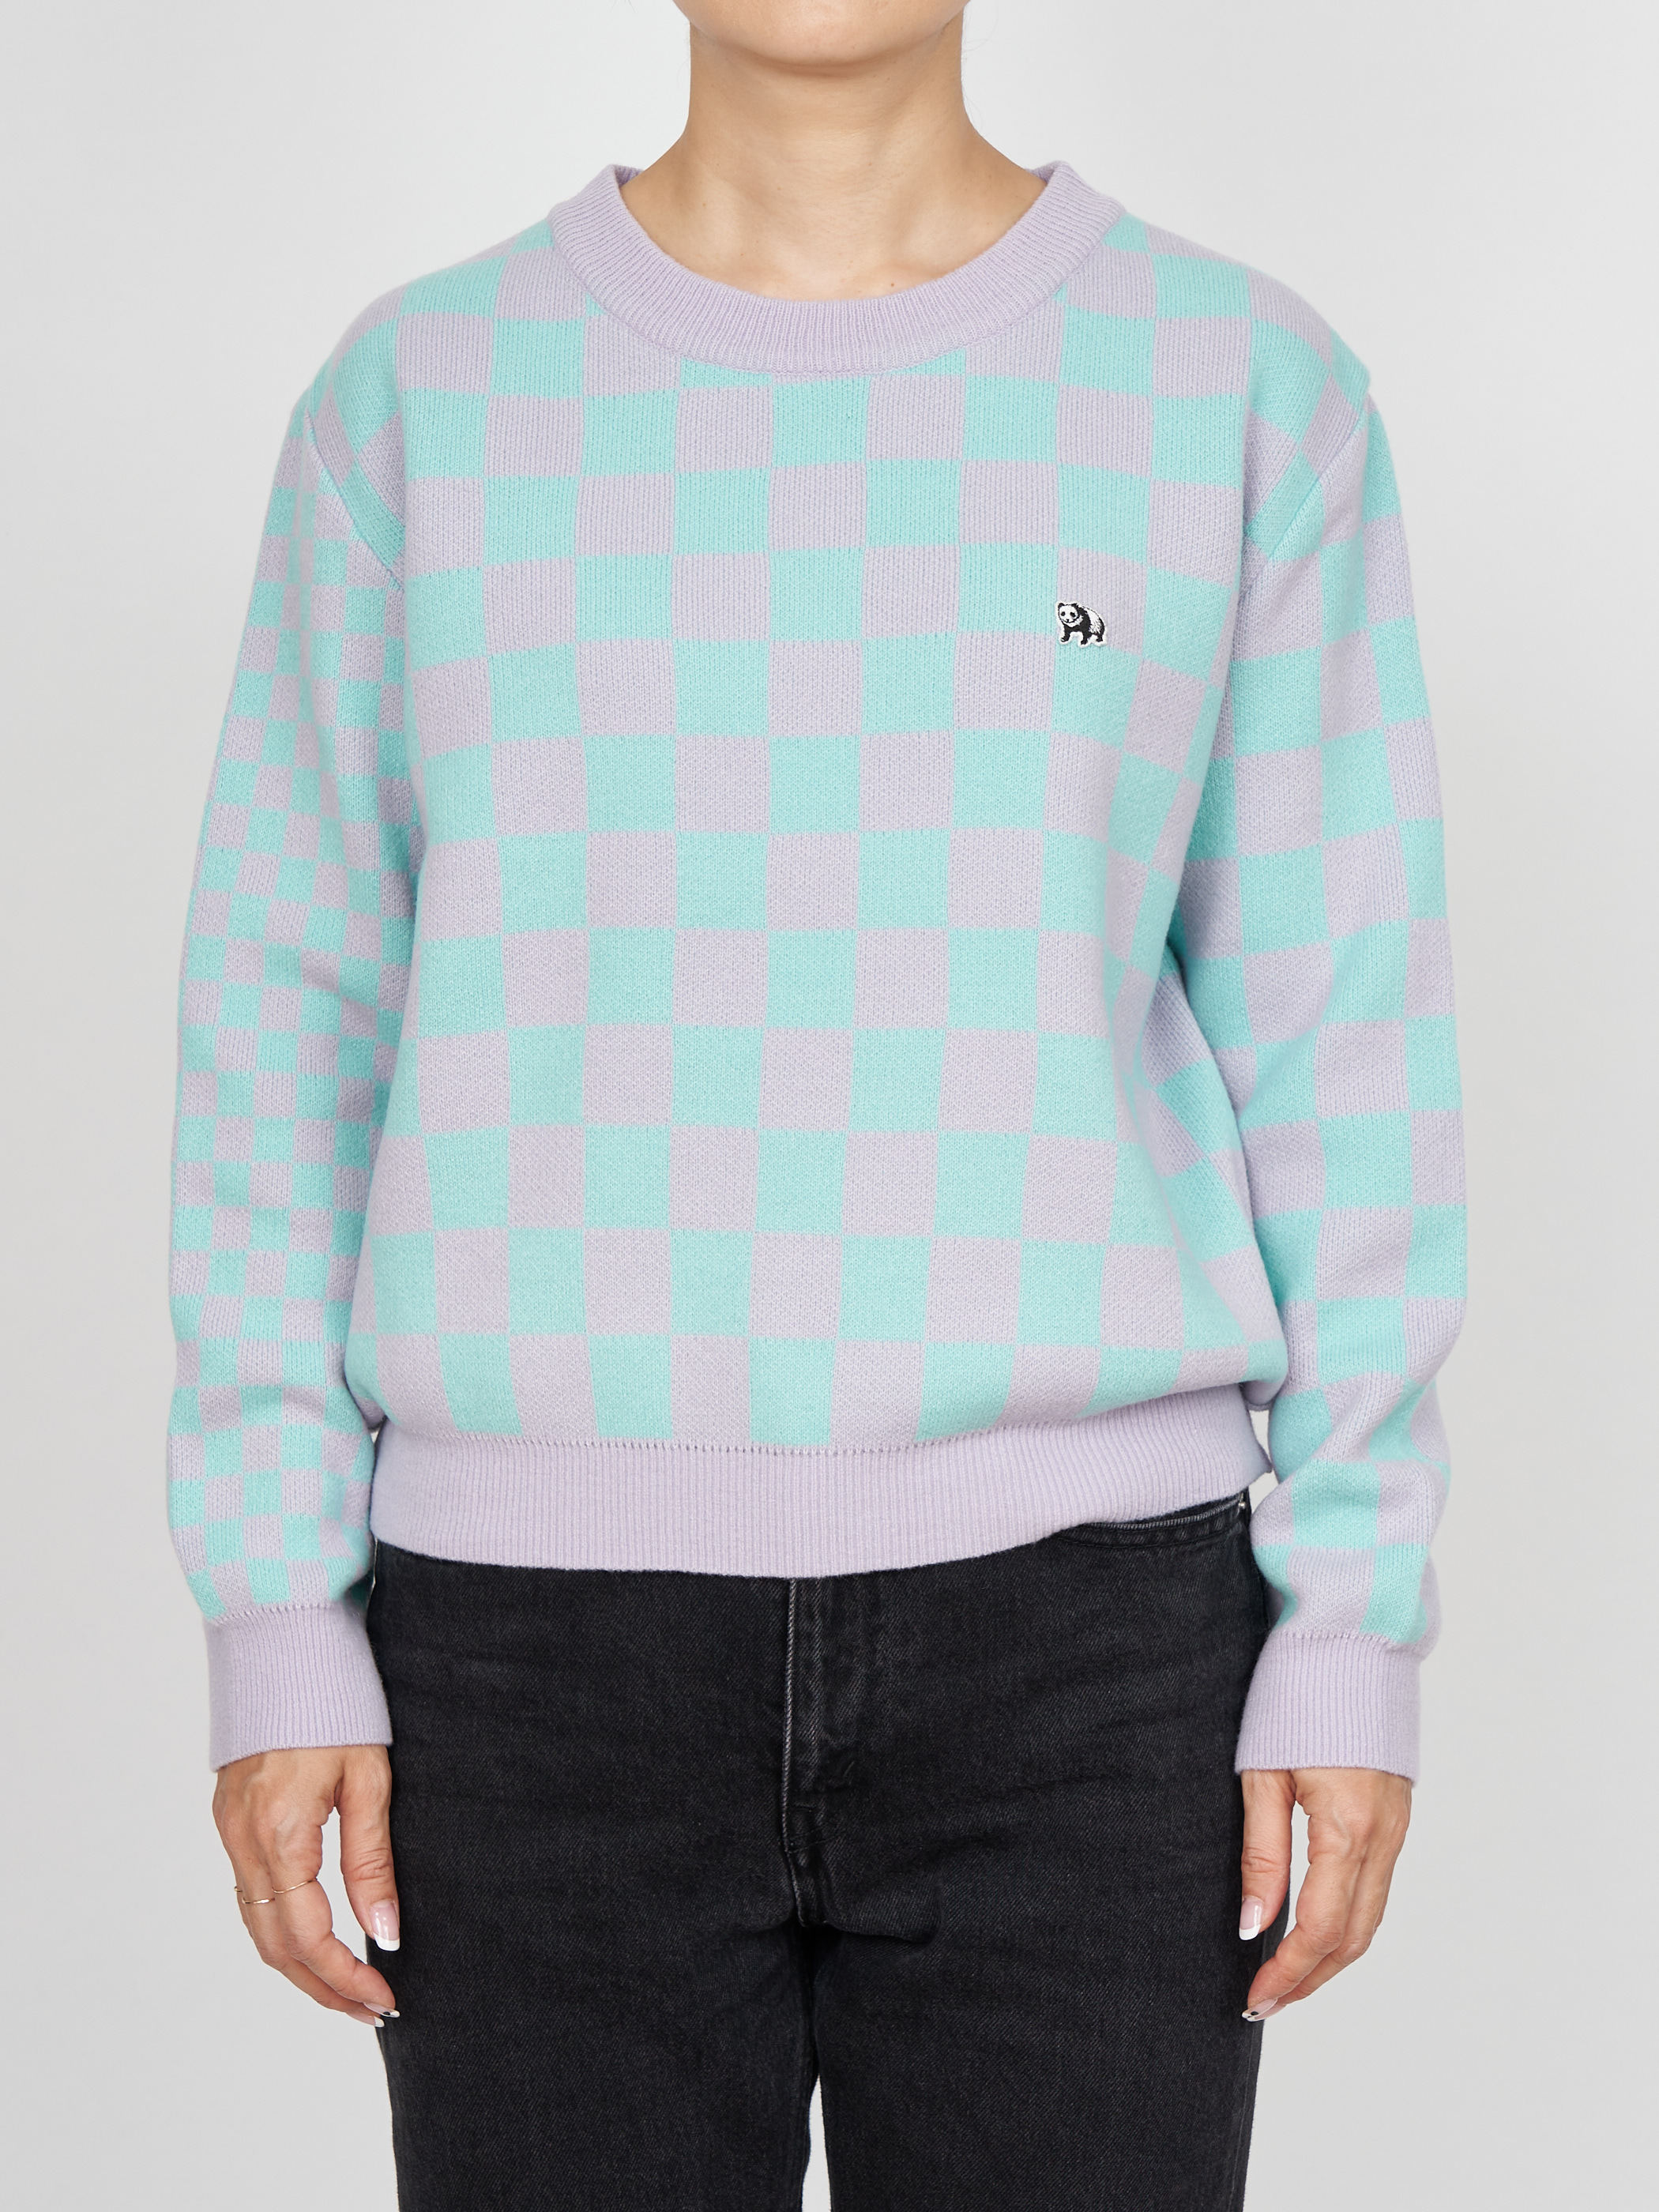 checkered sweater・MINT×LAVENDER